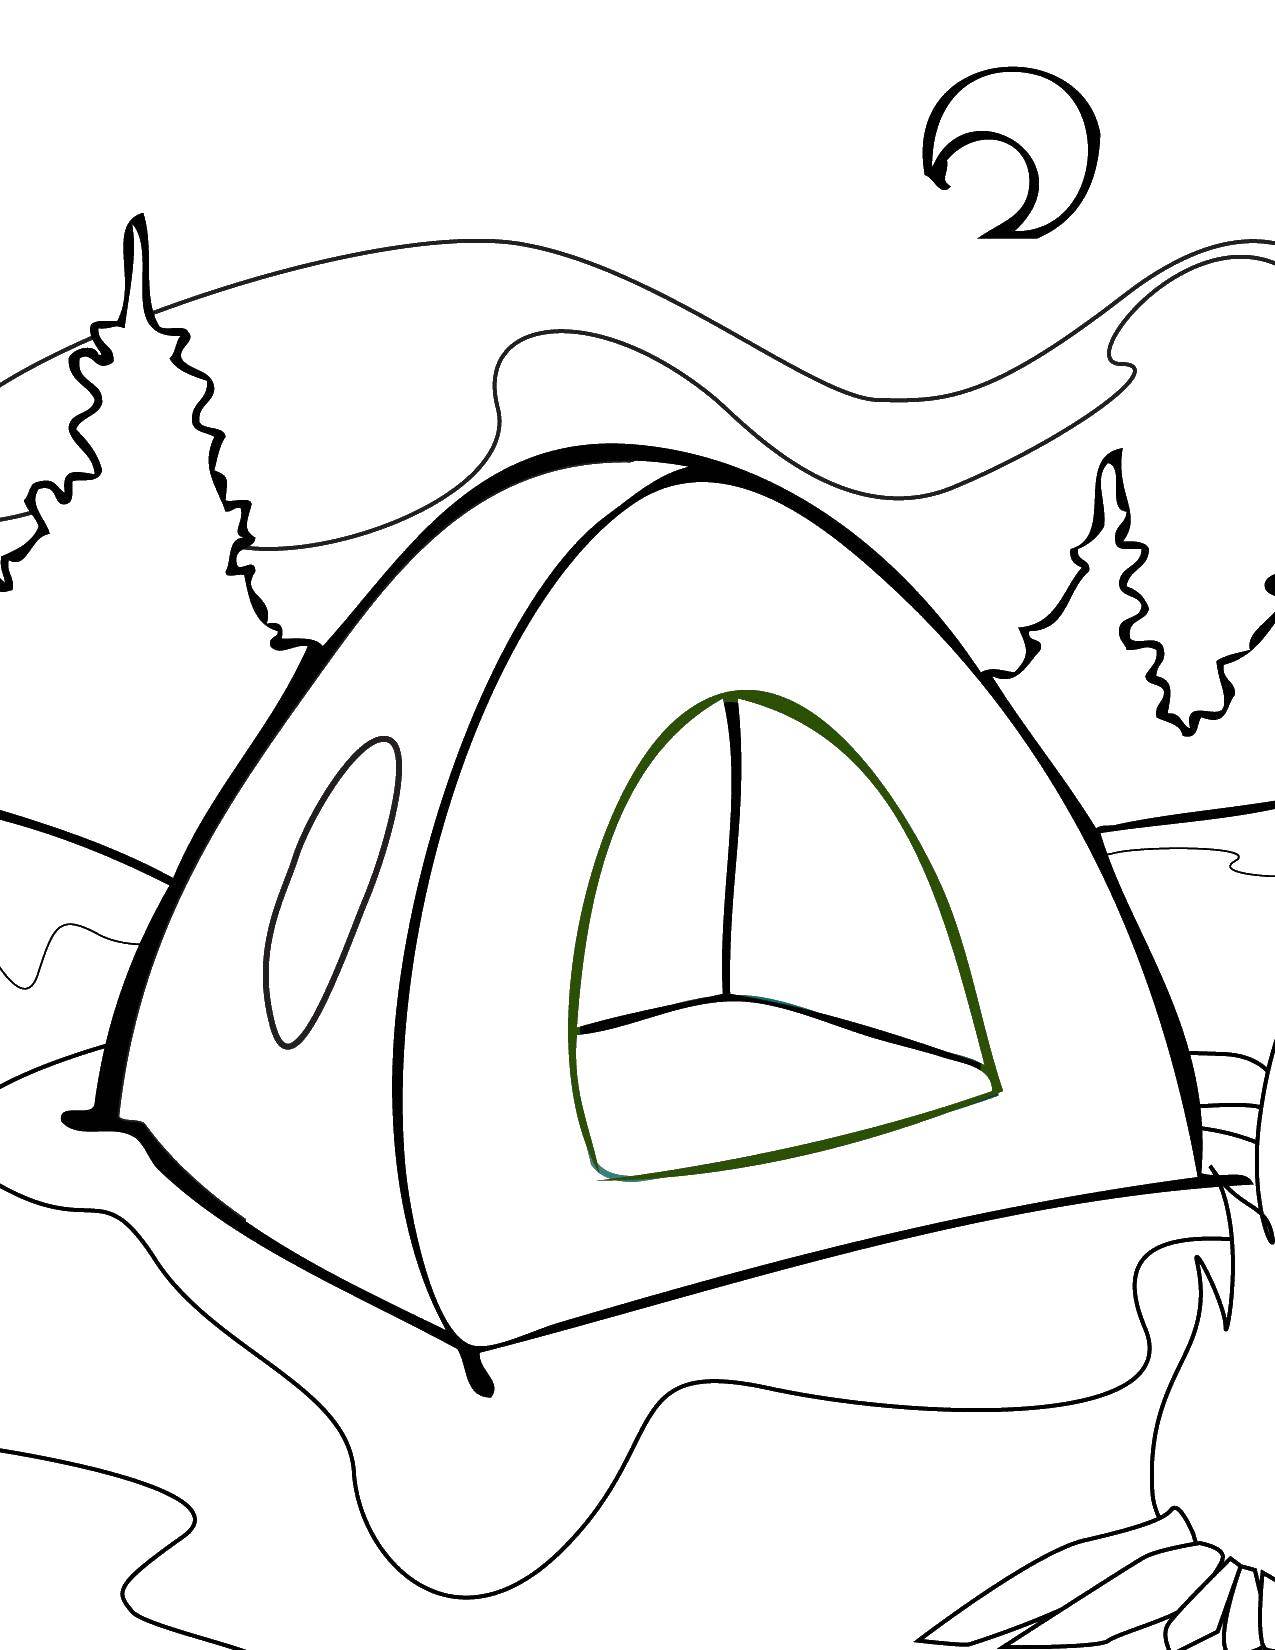 Coloring Tent night. Category Camping. Tags:  leisure, nature, tent.